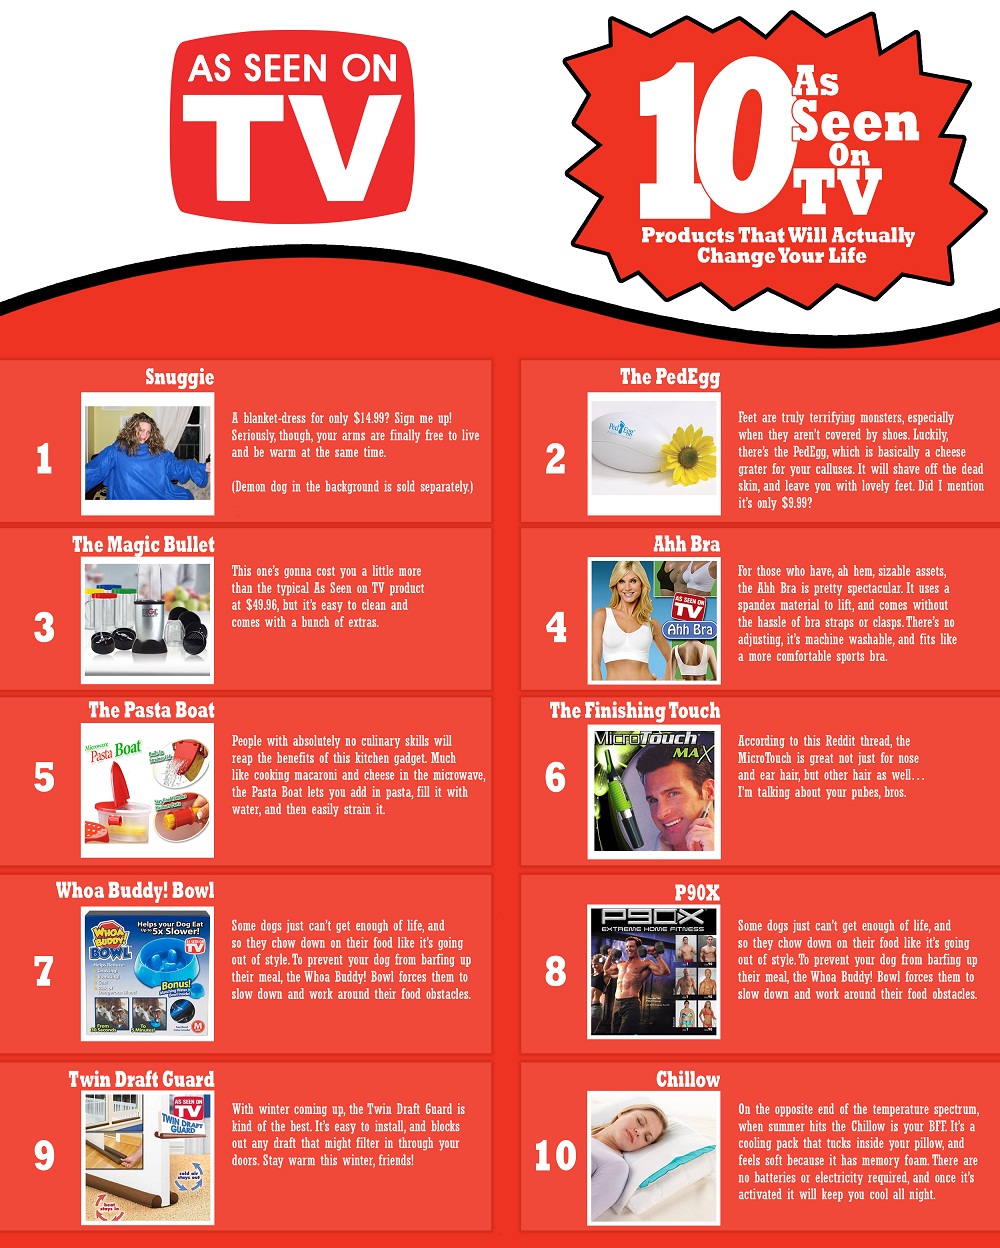 Most Famous & Popular As Seen On TV Products